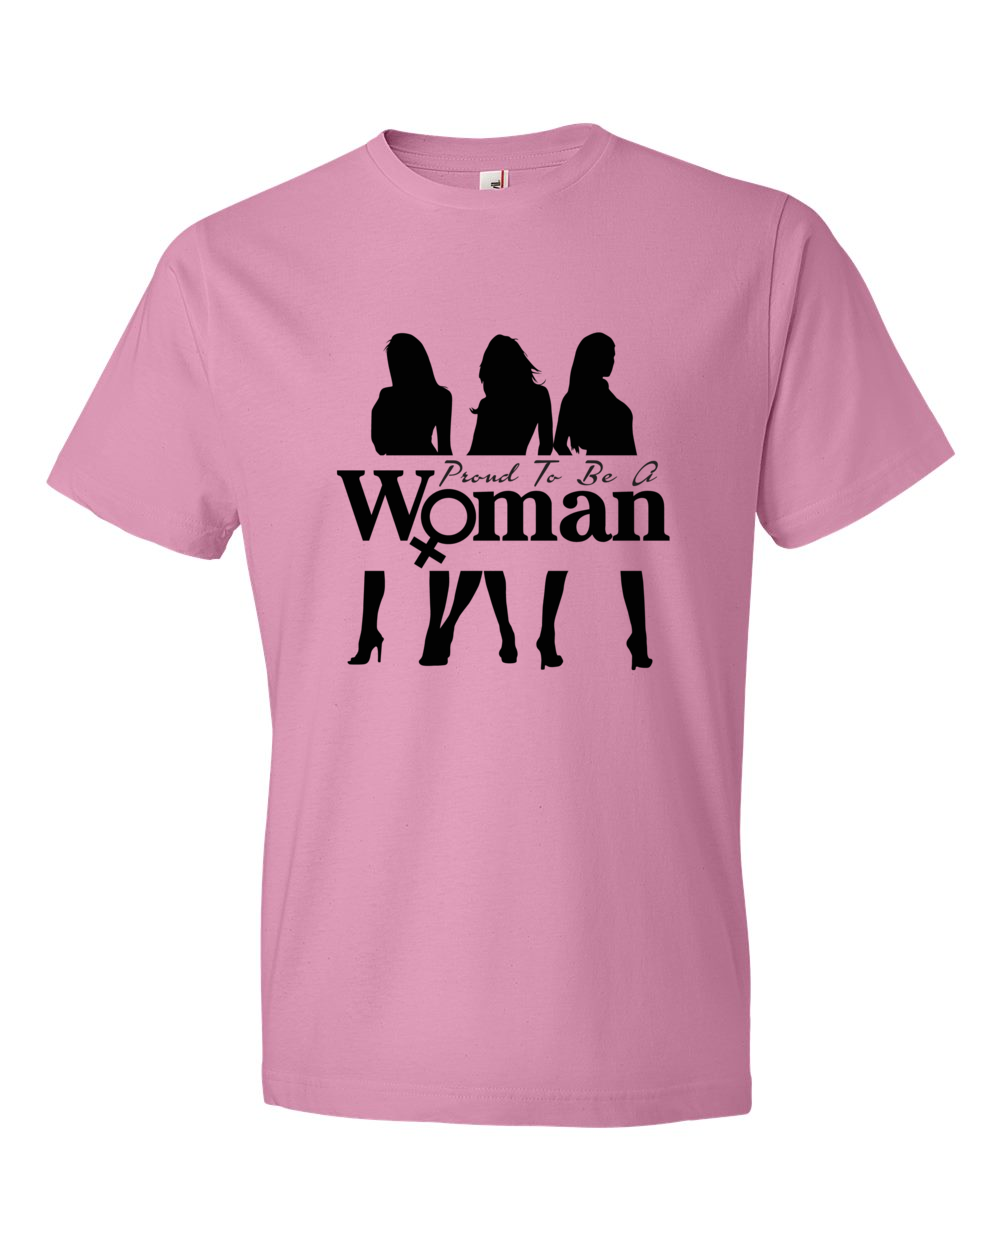 Proud to be a Woman - 3 Ladies